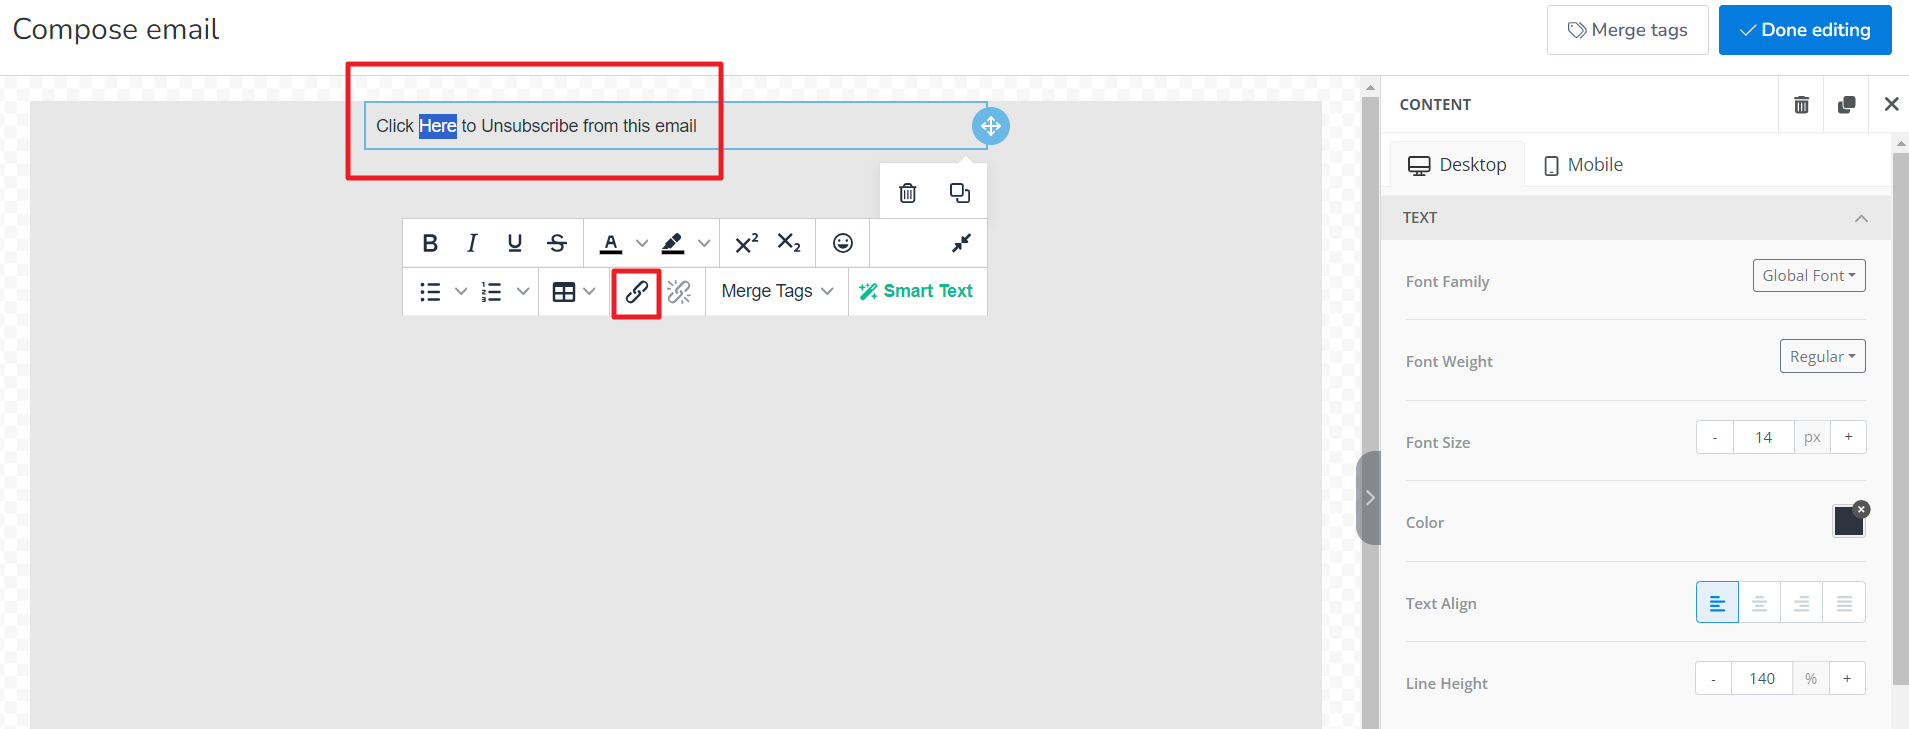 Highlighting “Here” and then clicking on Insert/edit link button